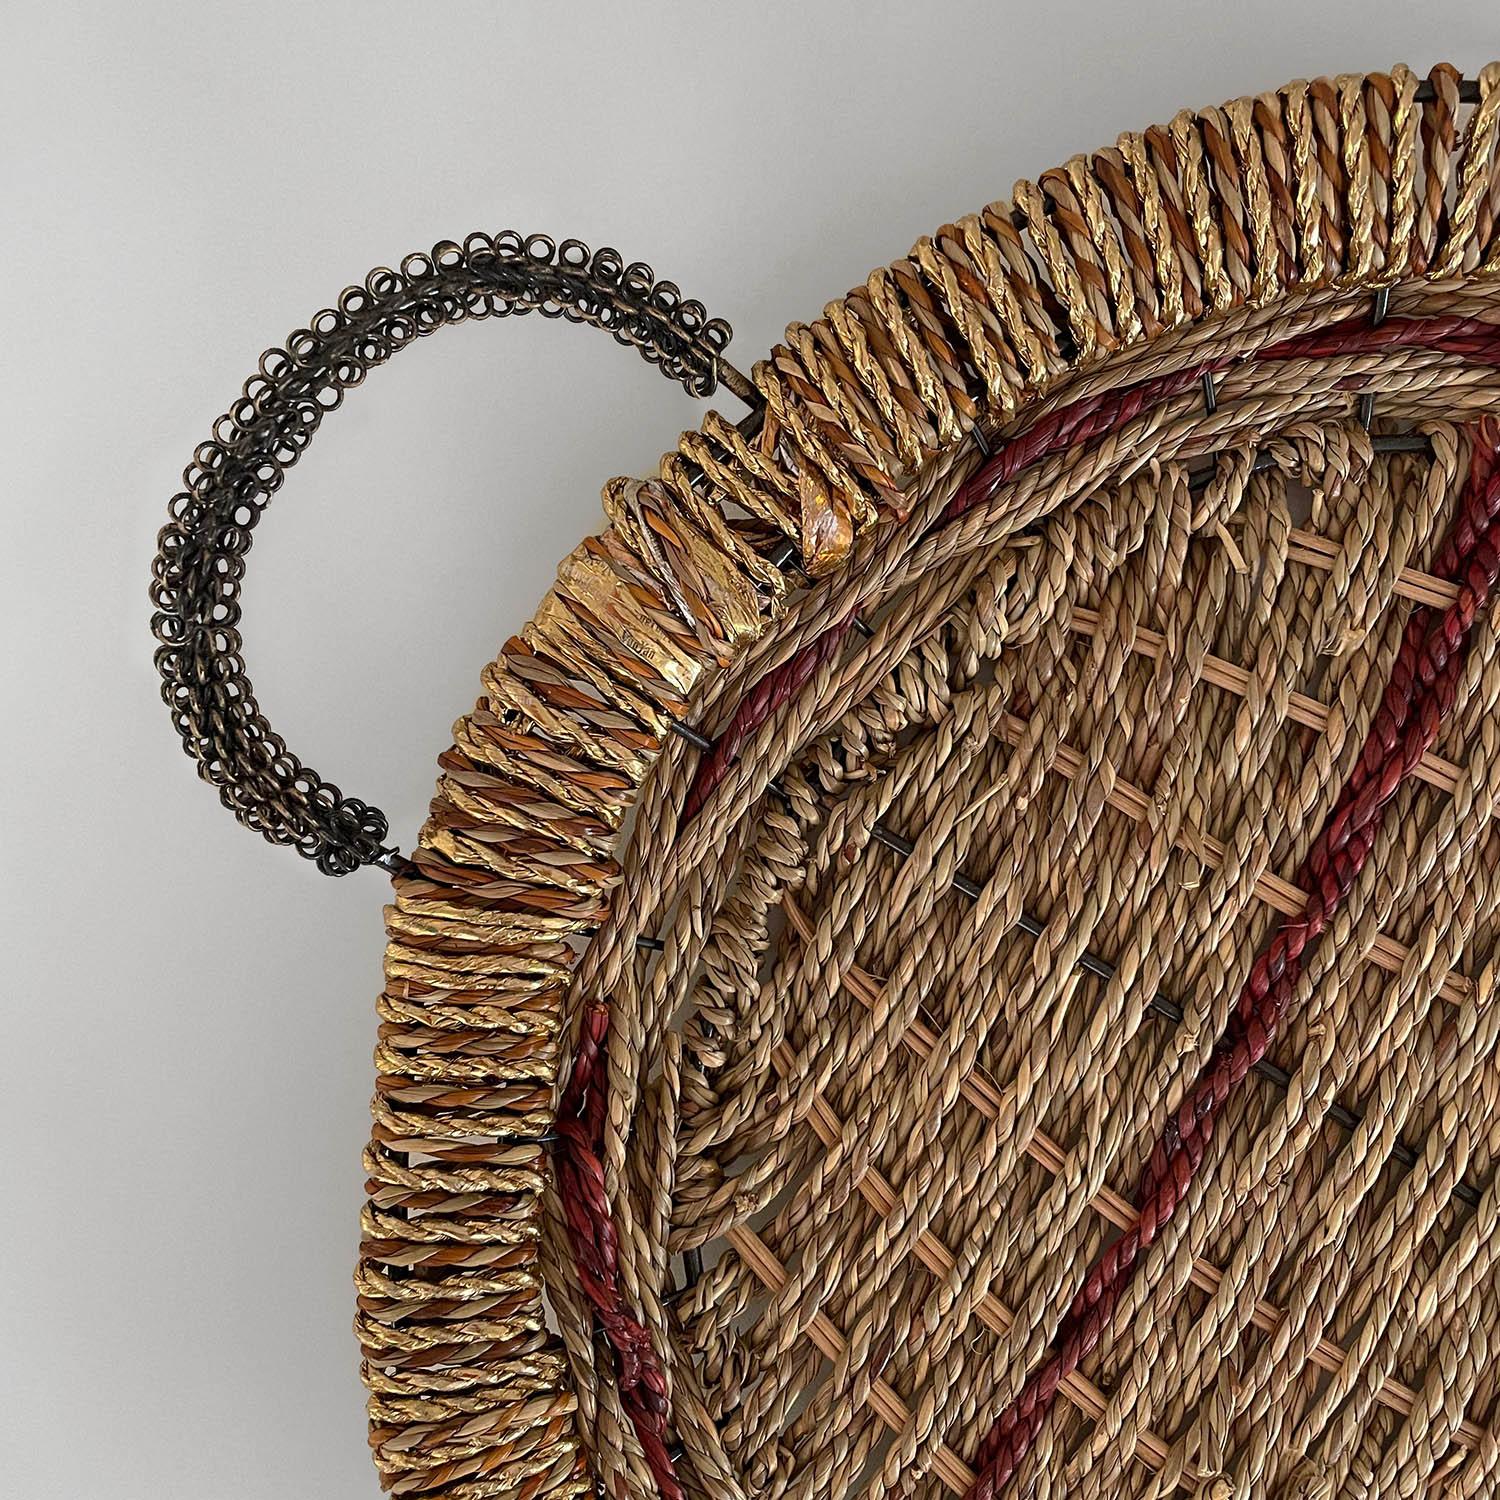 Rustic French woven tray
Beautifully woven jute and metallic threads over a wrought iron frame
Delicately braided steel coil handles
Neutral tones with accents of red and gold
Wonderful addition to any surface
Patina from age and use